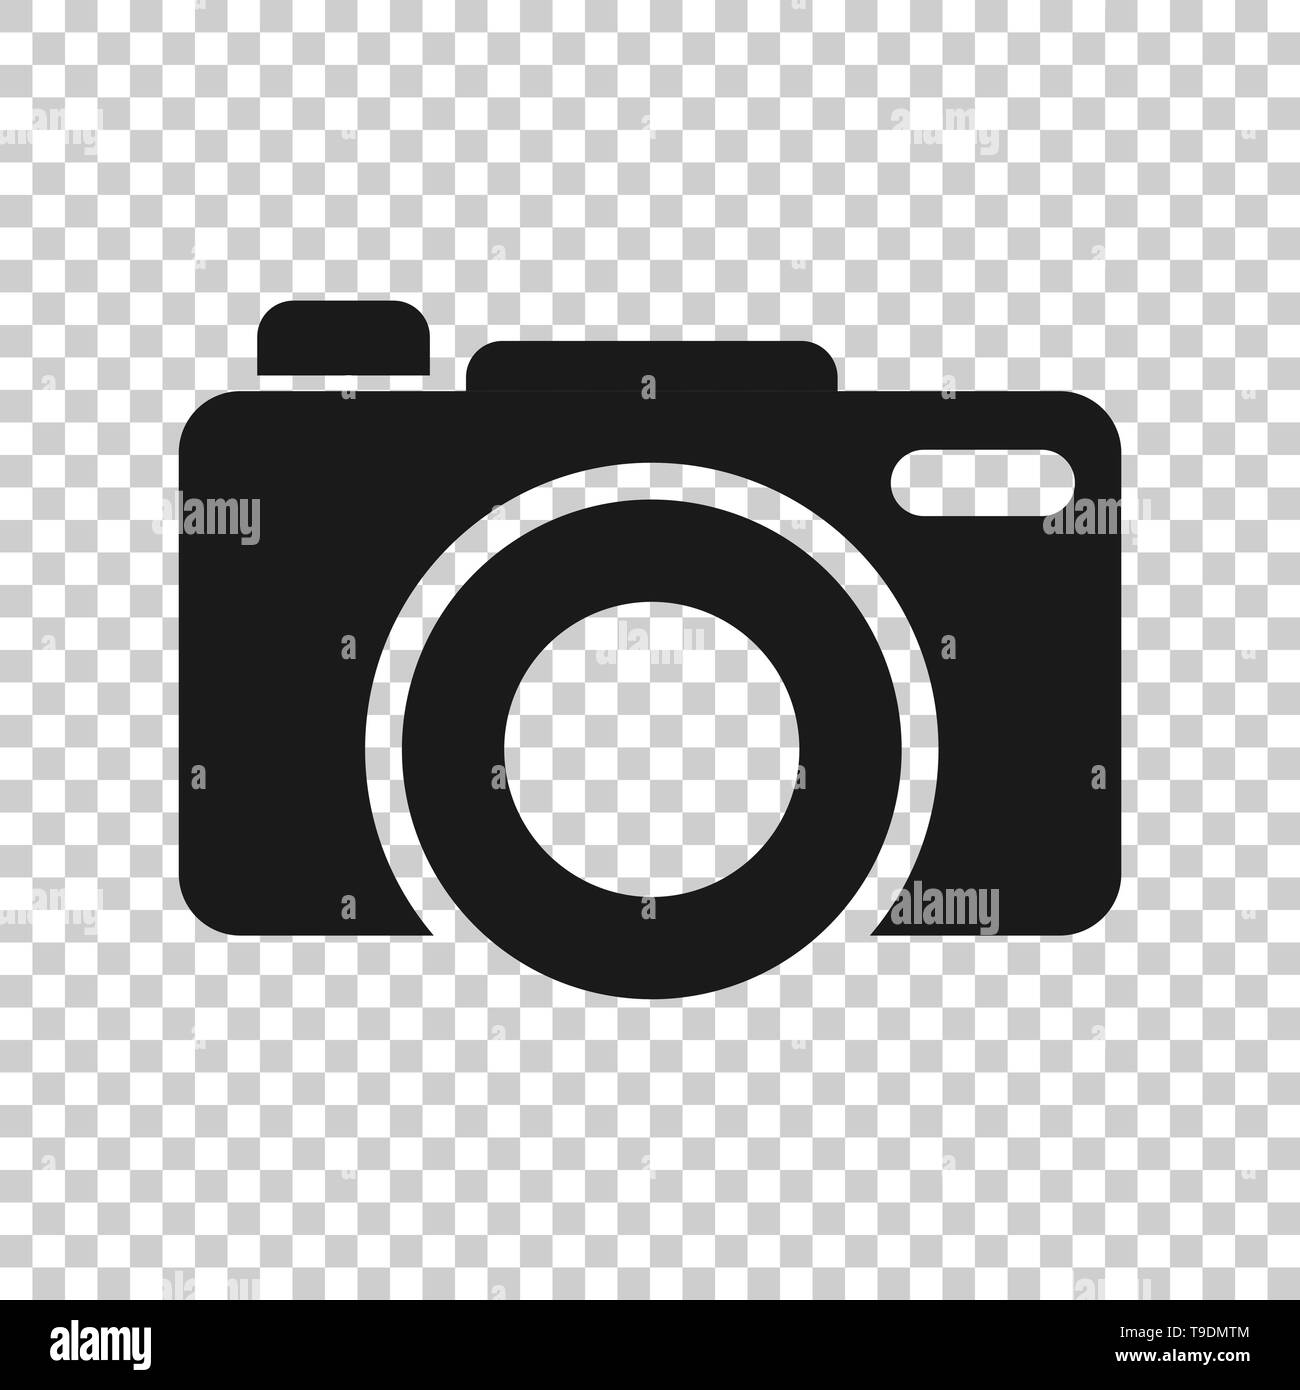 Camera device sign icon in transparent style. Photography vector illustration on isolated background. Cam equipment business concept. Stock Vector